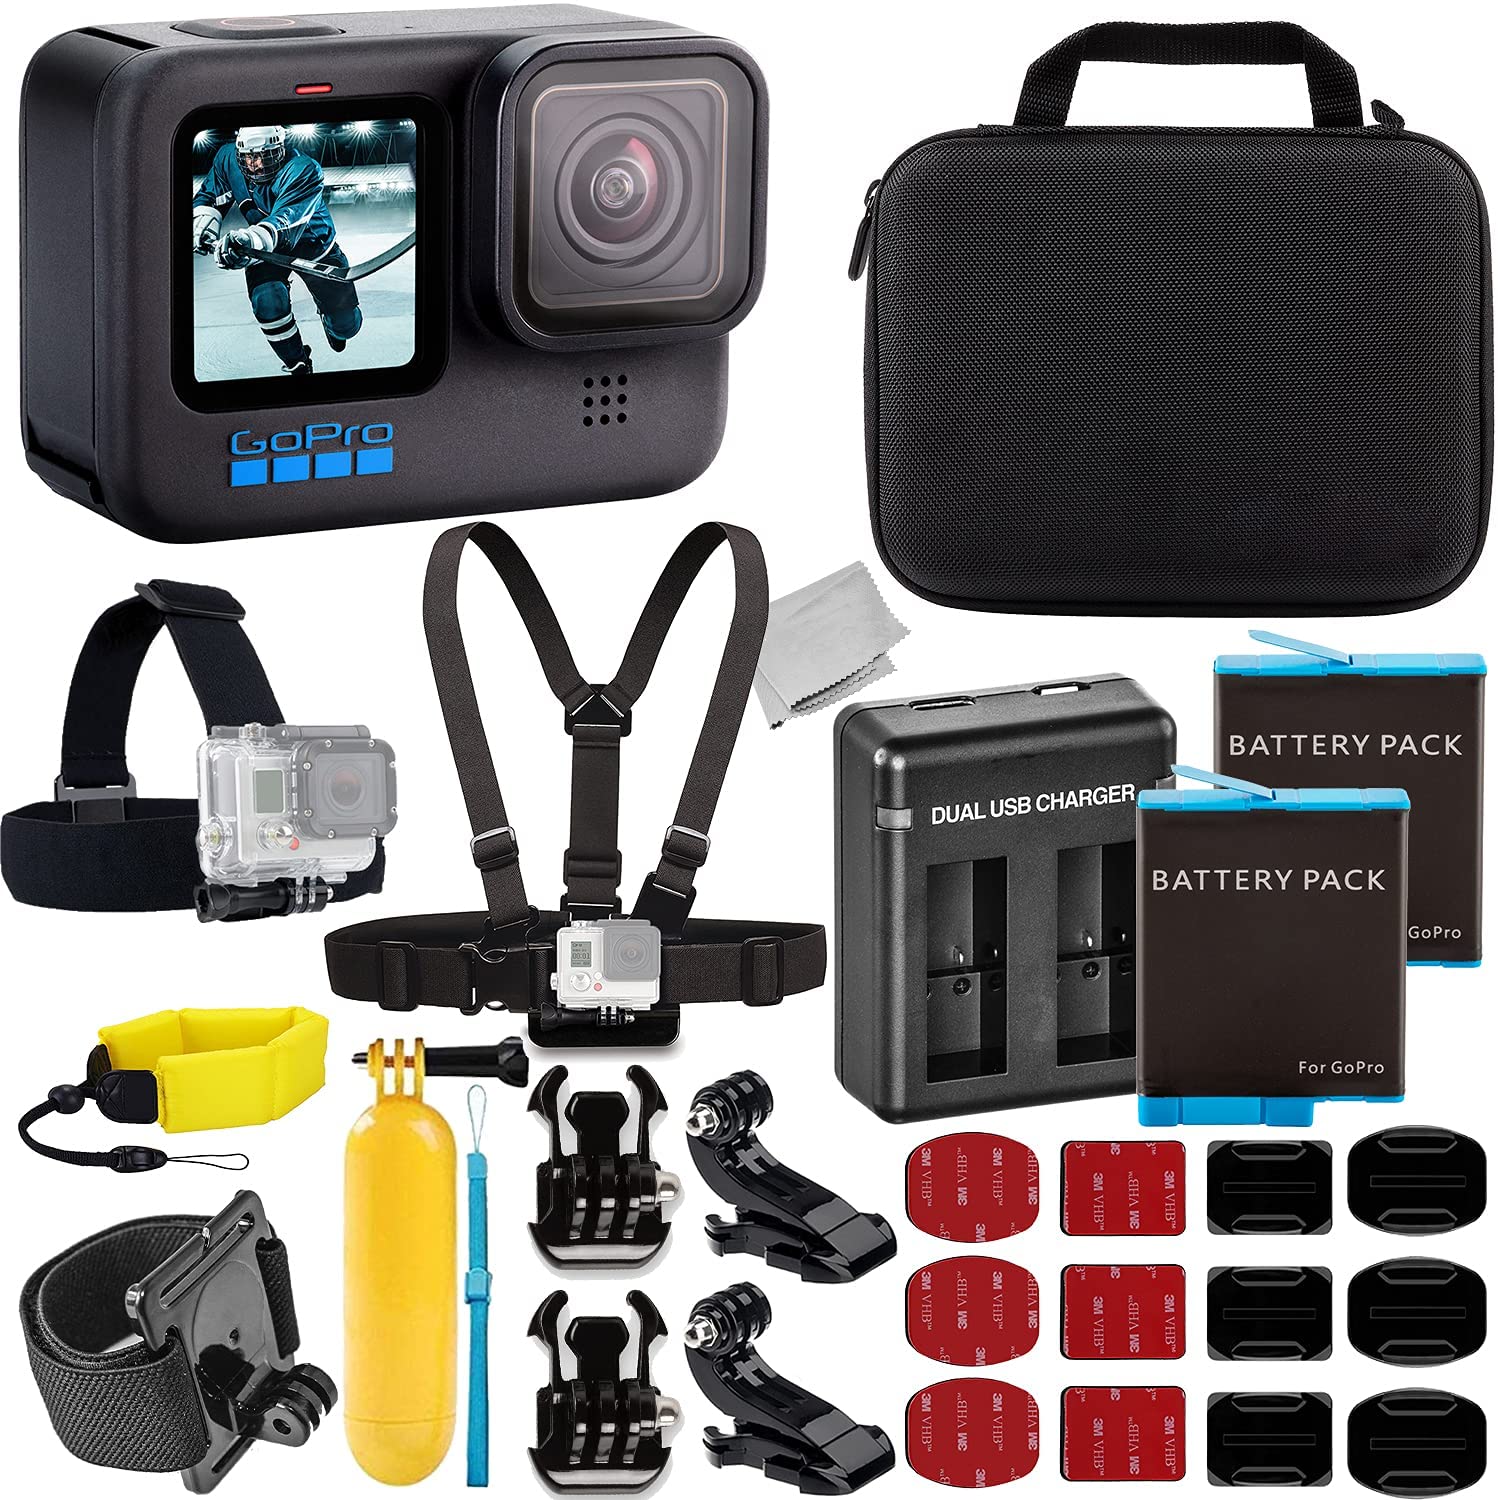 GoPro HERO10 (Hero 10) Black with Essential Accessory Bundle: 2X Replacement Batteries, Dual USB Charger, Water Resistant Action Camera Case, Floating “Bobber” Handle, Chest Strap & Much More